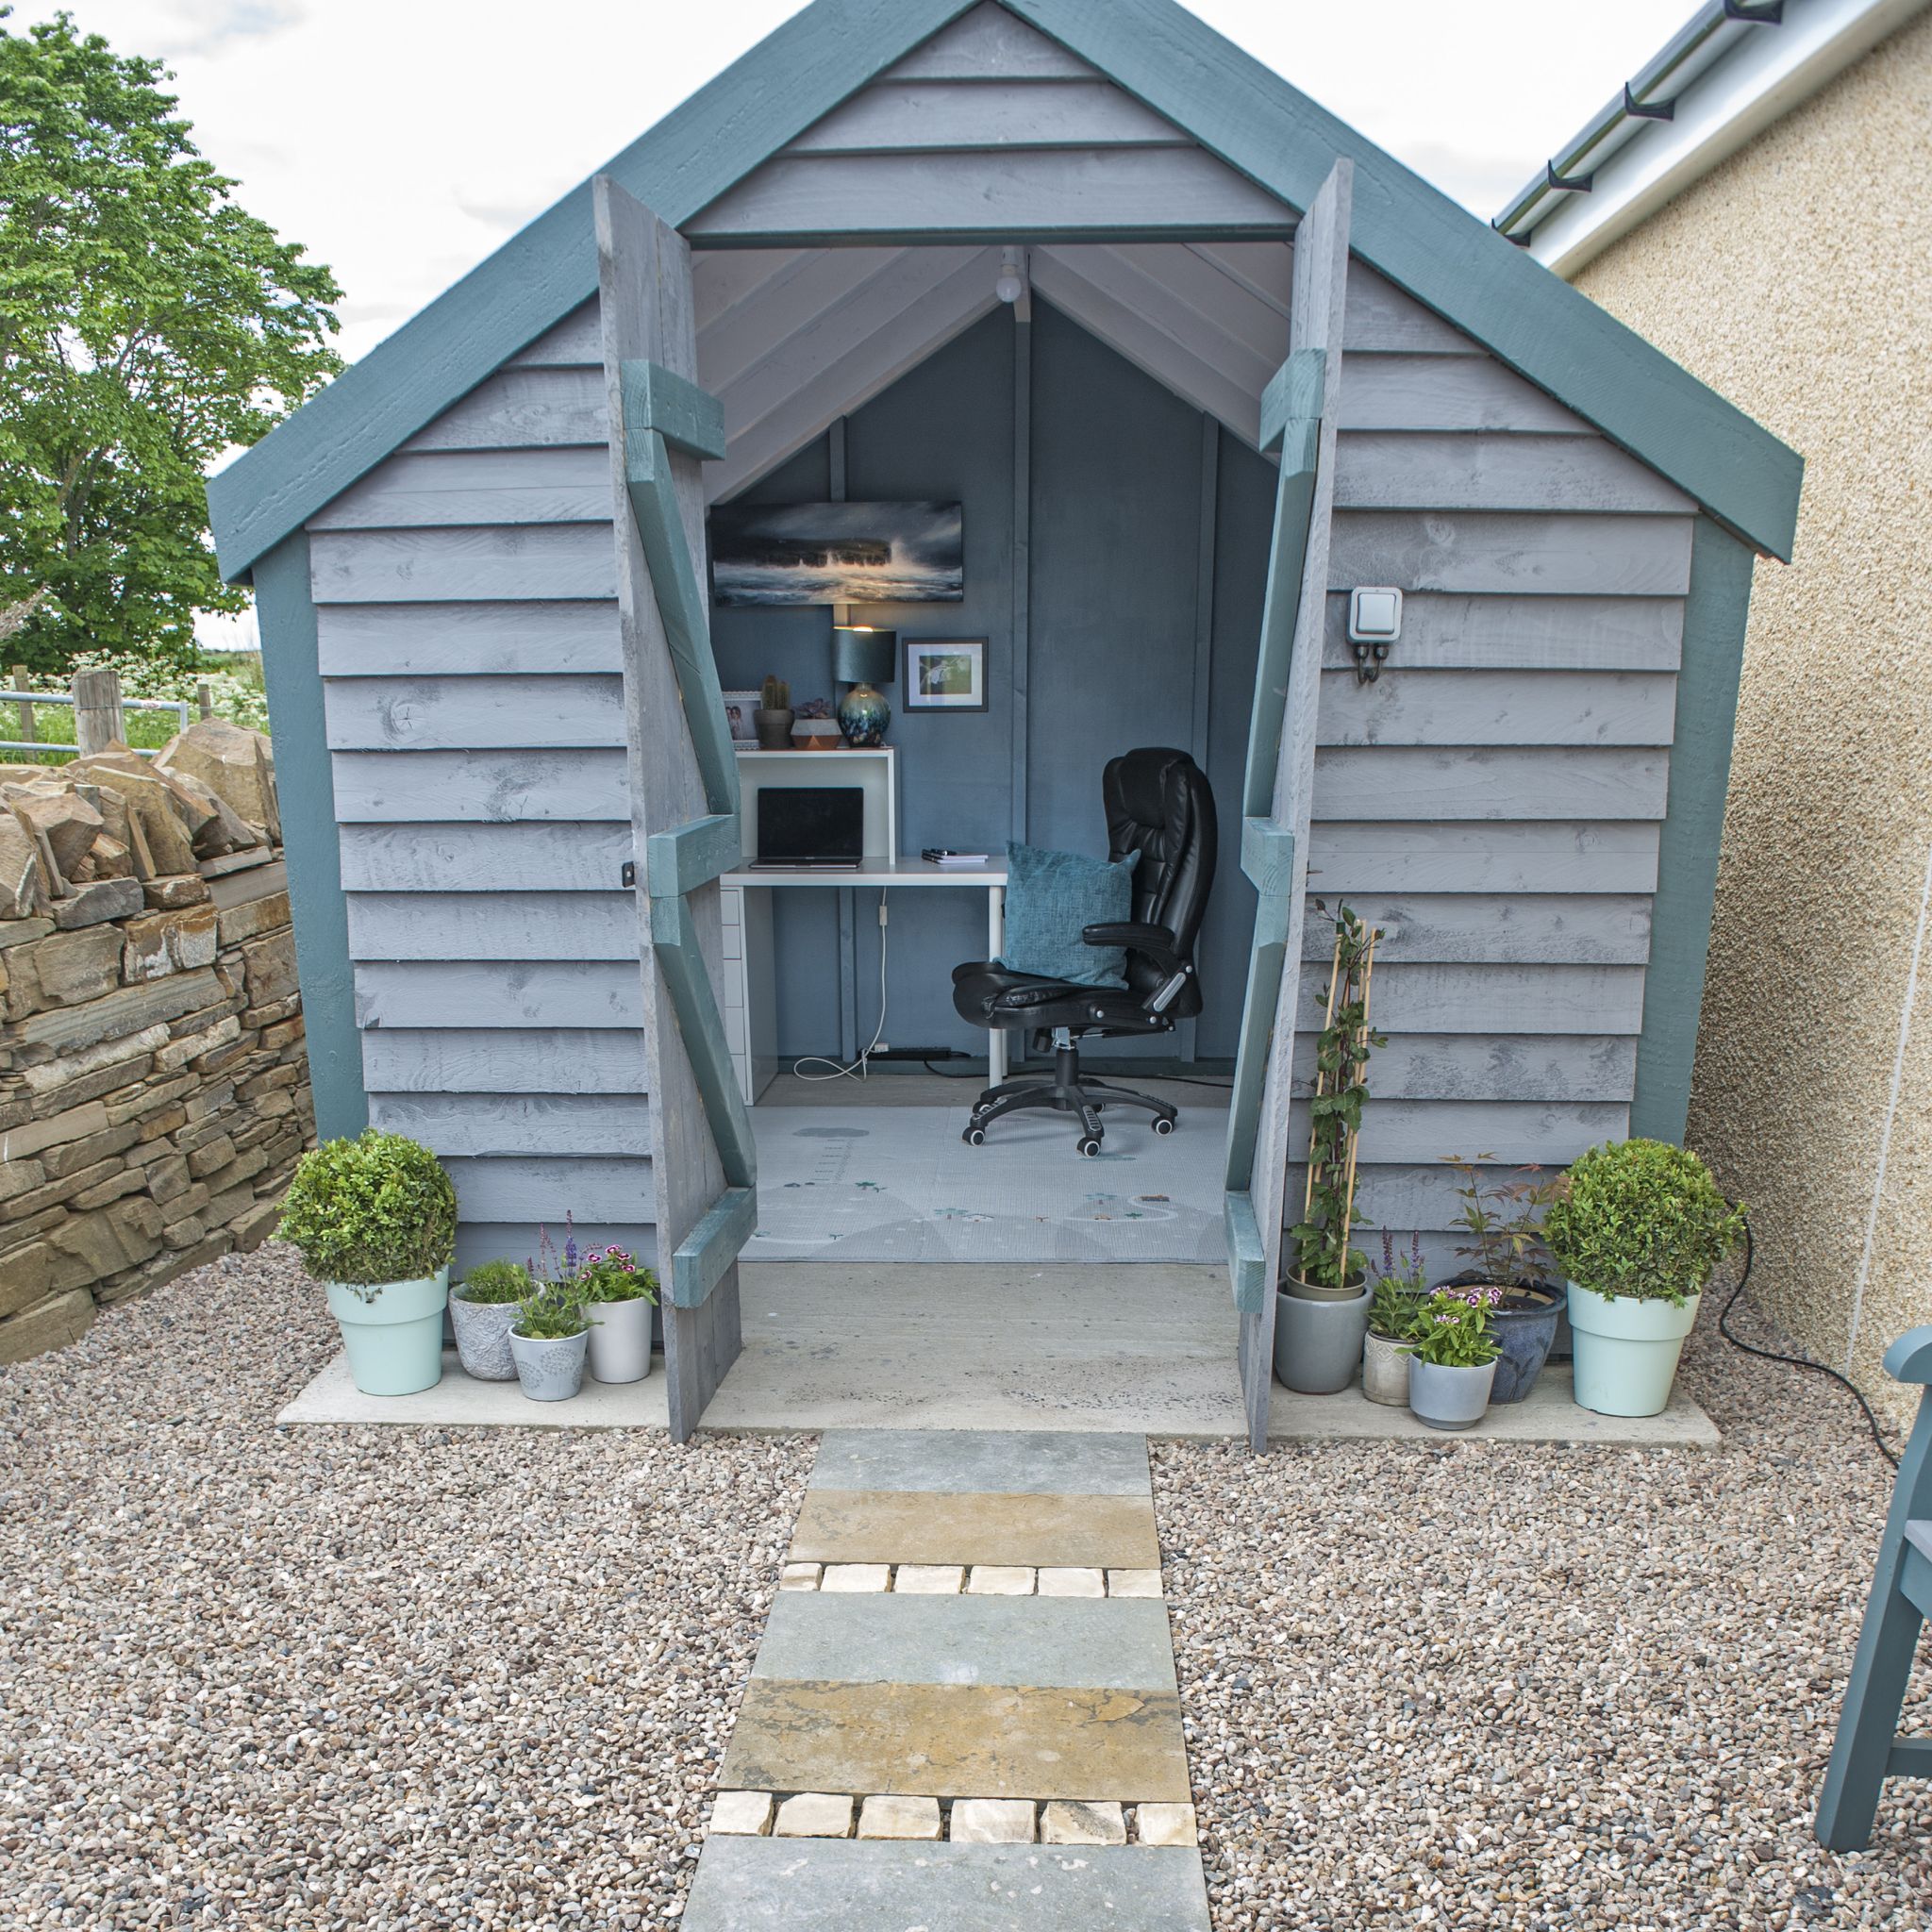 free for editorial use picturedclaire hughes of caithness, scotland, has taken the top accolade for her sensational shed office in her gardenthe winner of the wickes home office awards has been crowned, alongside four shortlisted winners from across the uk launched in mid april, the awards sought the best in home office set  ups, after more than a year of video calls led the nation to upping their creativity when designing working from home spacesjudged by tv celebrities and property experts phil spencer  ben hillman, wickes awards were created to celebrate and reward the creators of the best wfh spaces across the ukafter weeks of social media entries, claire hughes of caithness, scotland, has taken the top accolade for her sensational shed office in her garden